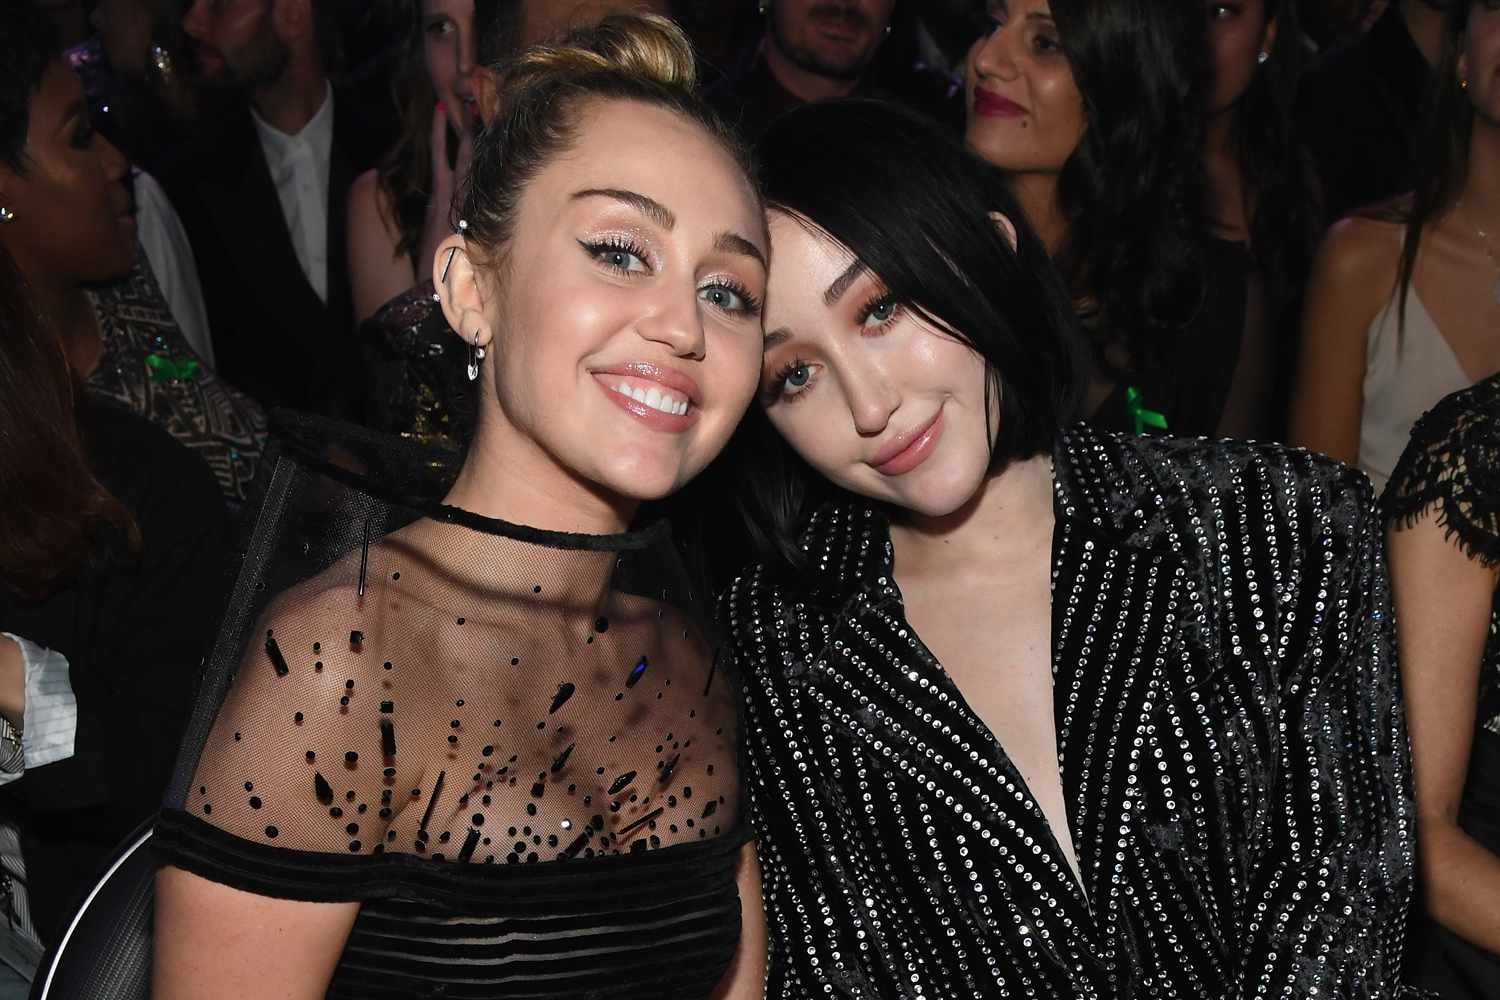 Miley Cyrus says sister Noah pushed button to take nude cover photo